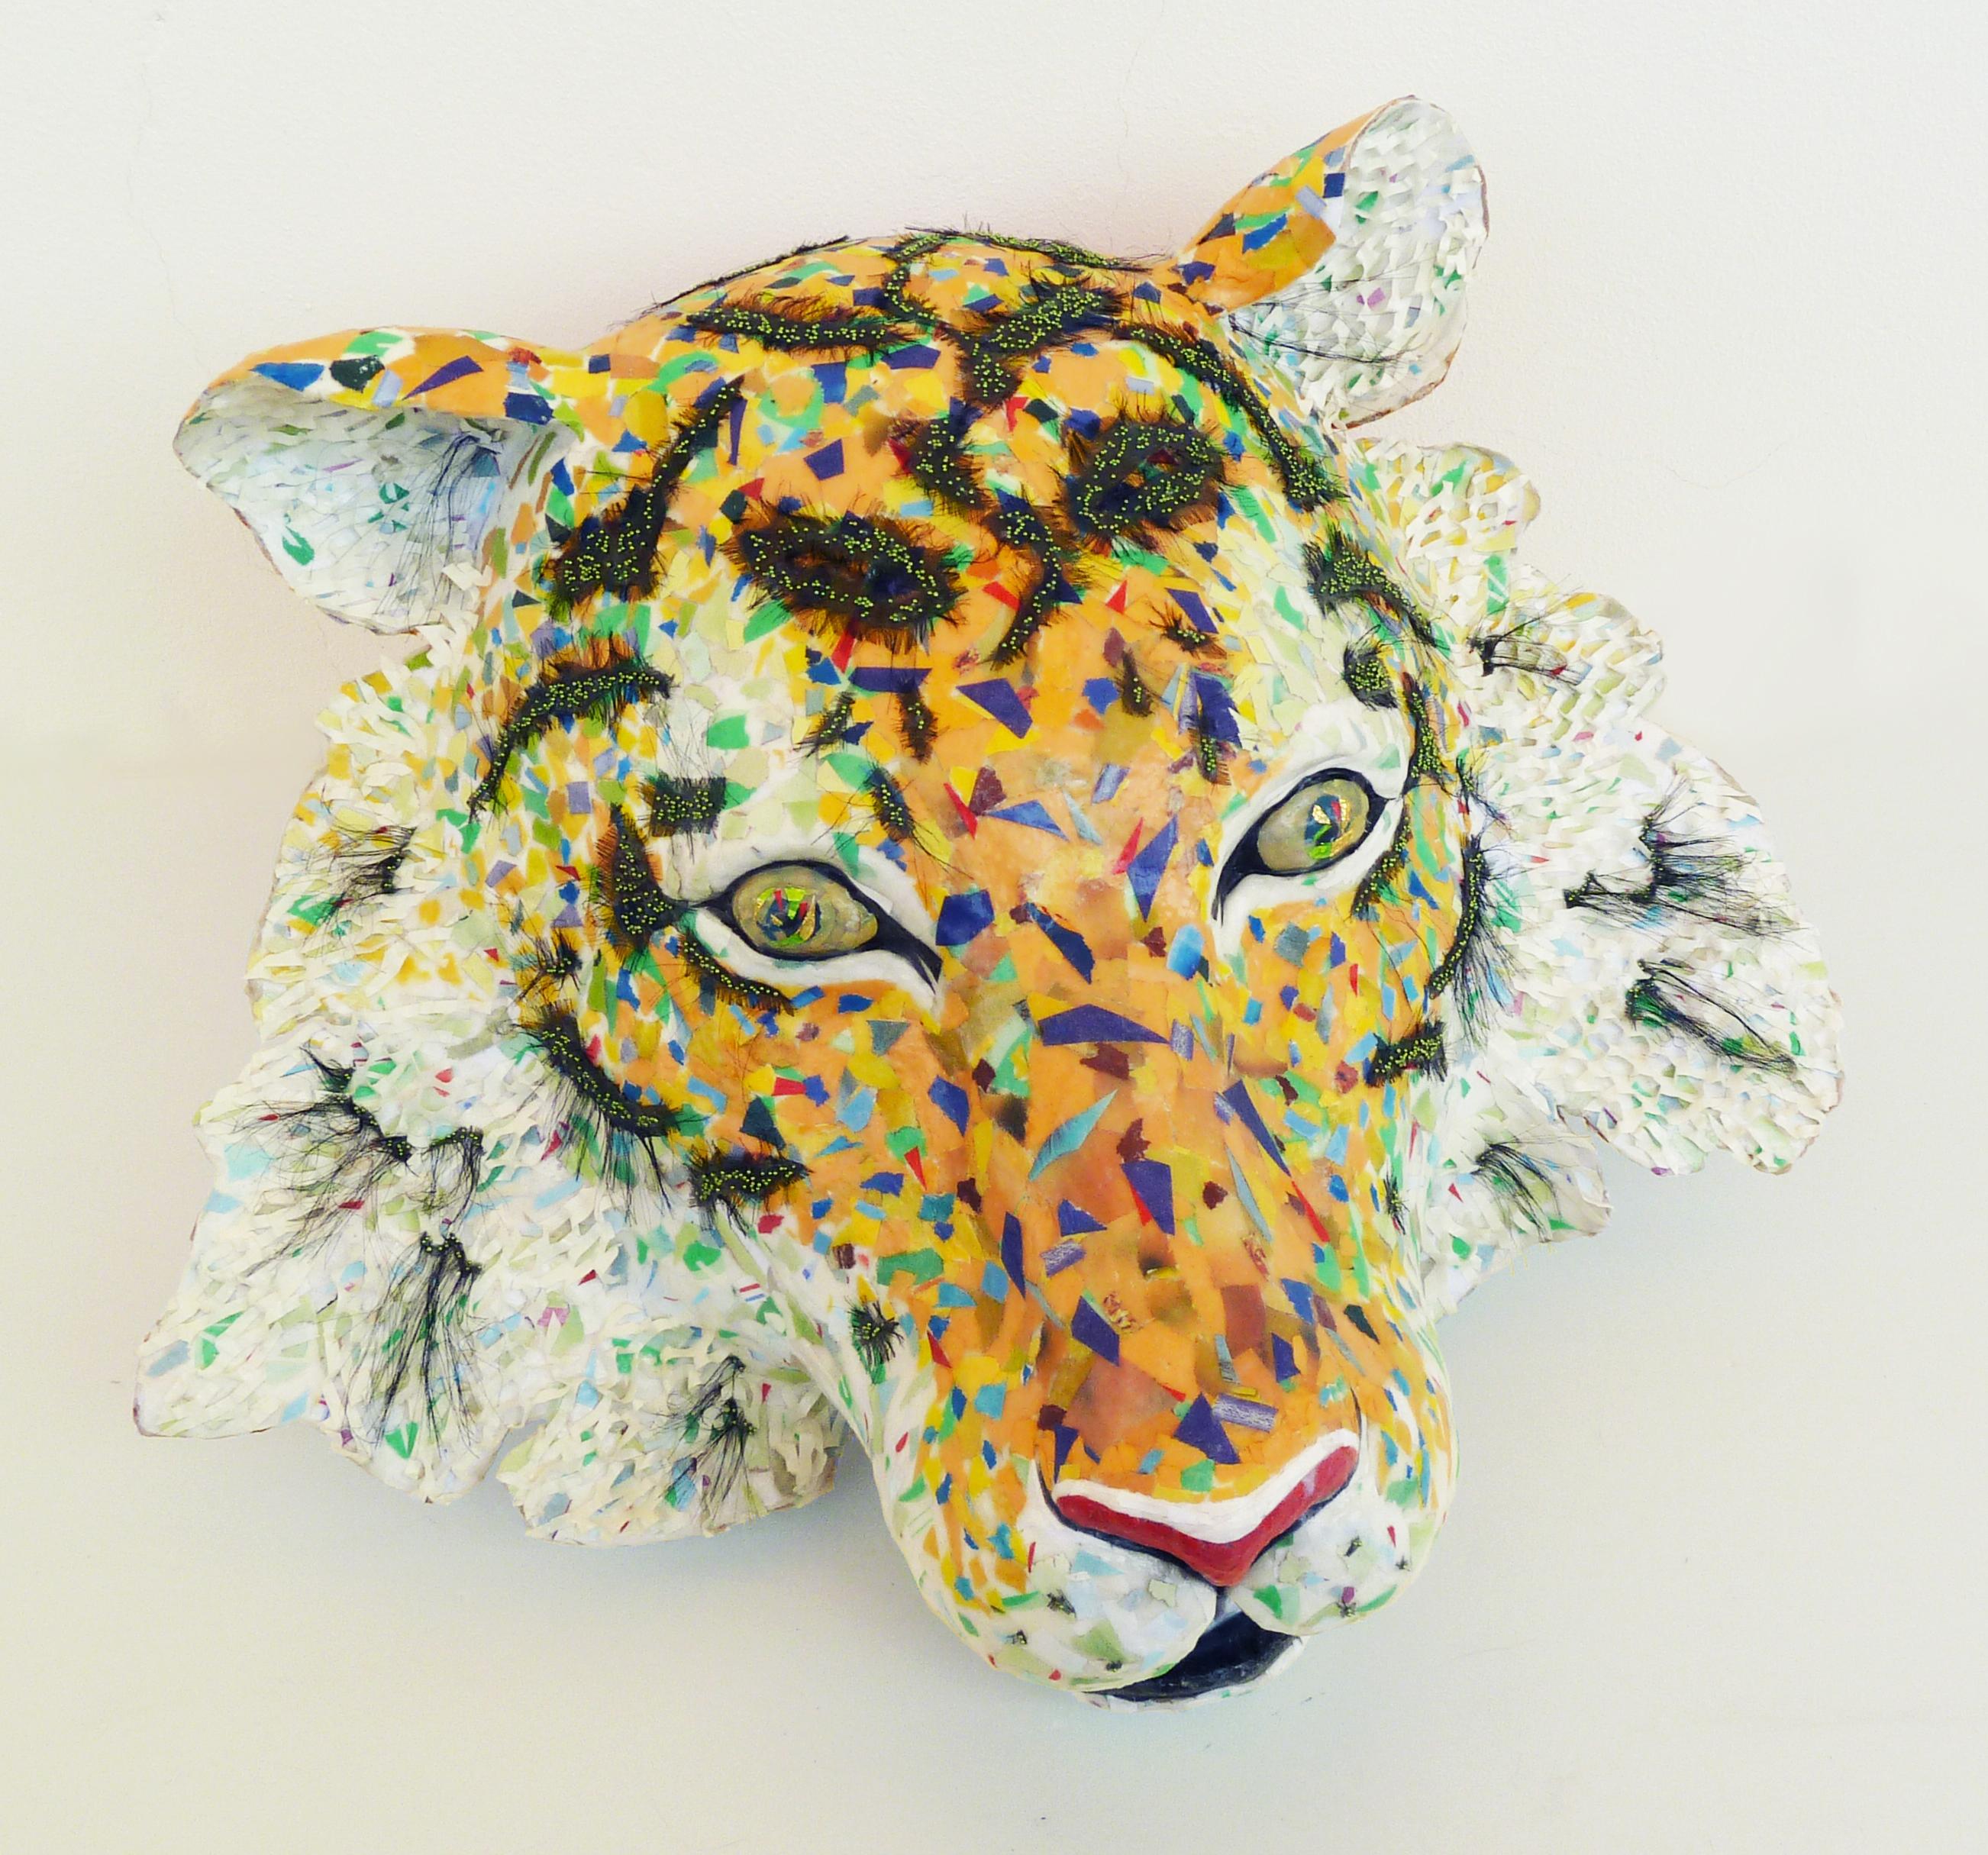 Amur- Sculpture of Endangered Siberian Tiger Created from Up-Cycled Materials